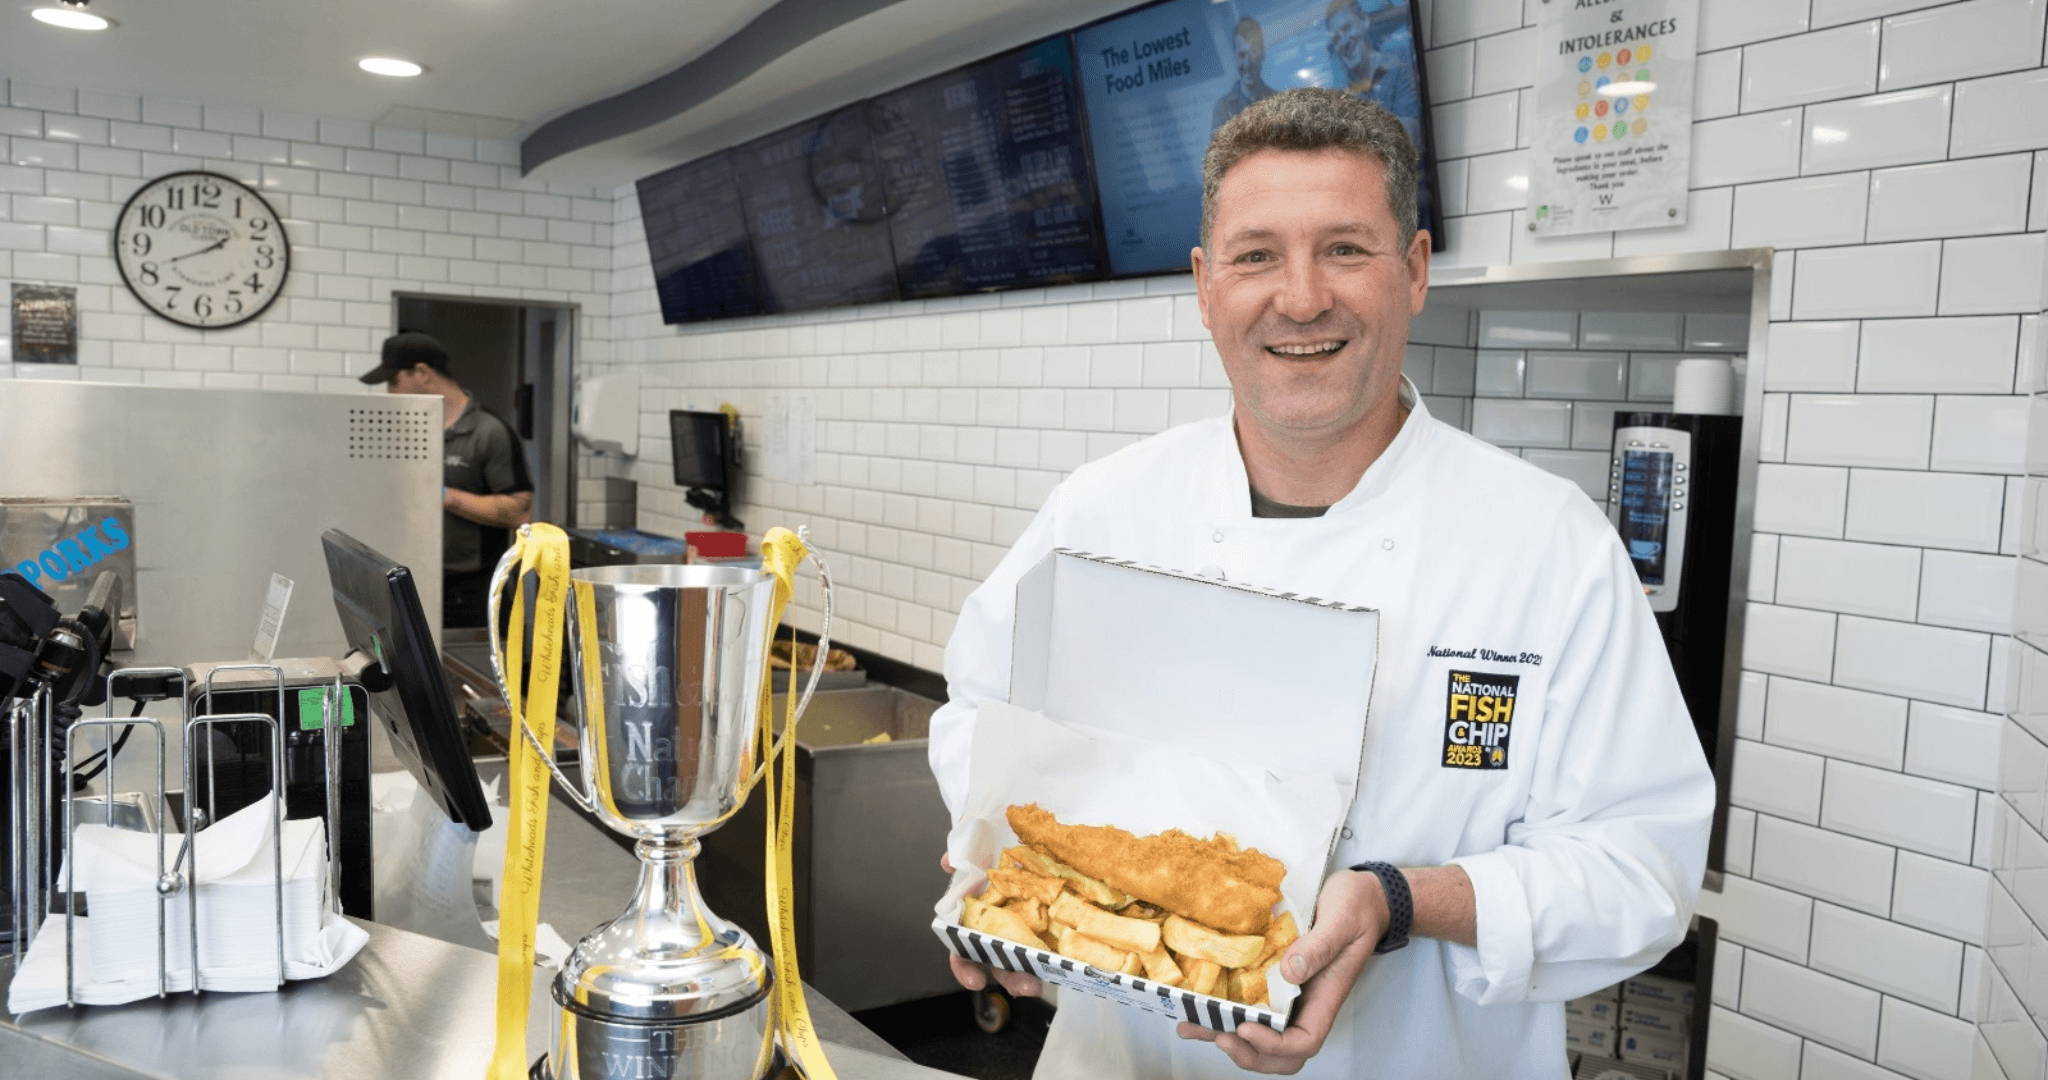 Geoff holding fish & chips